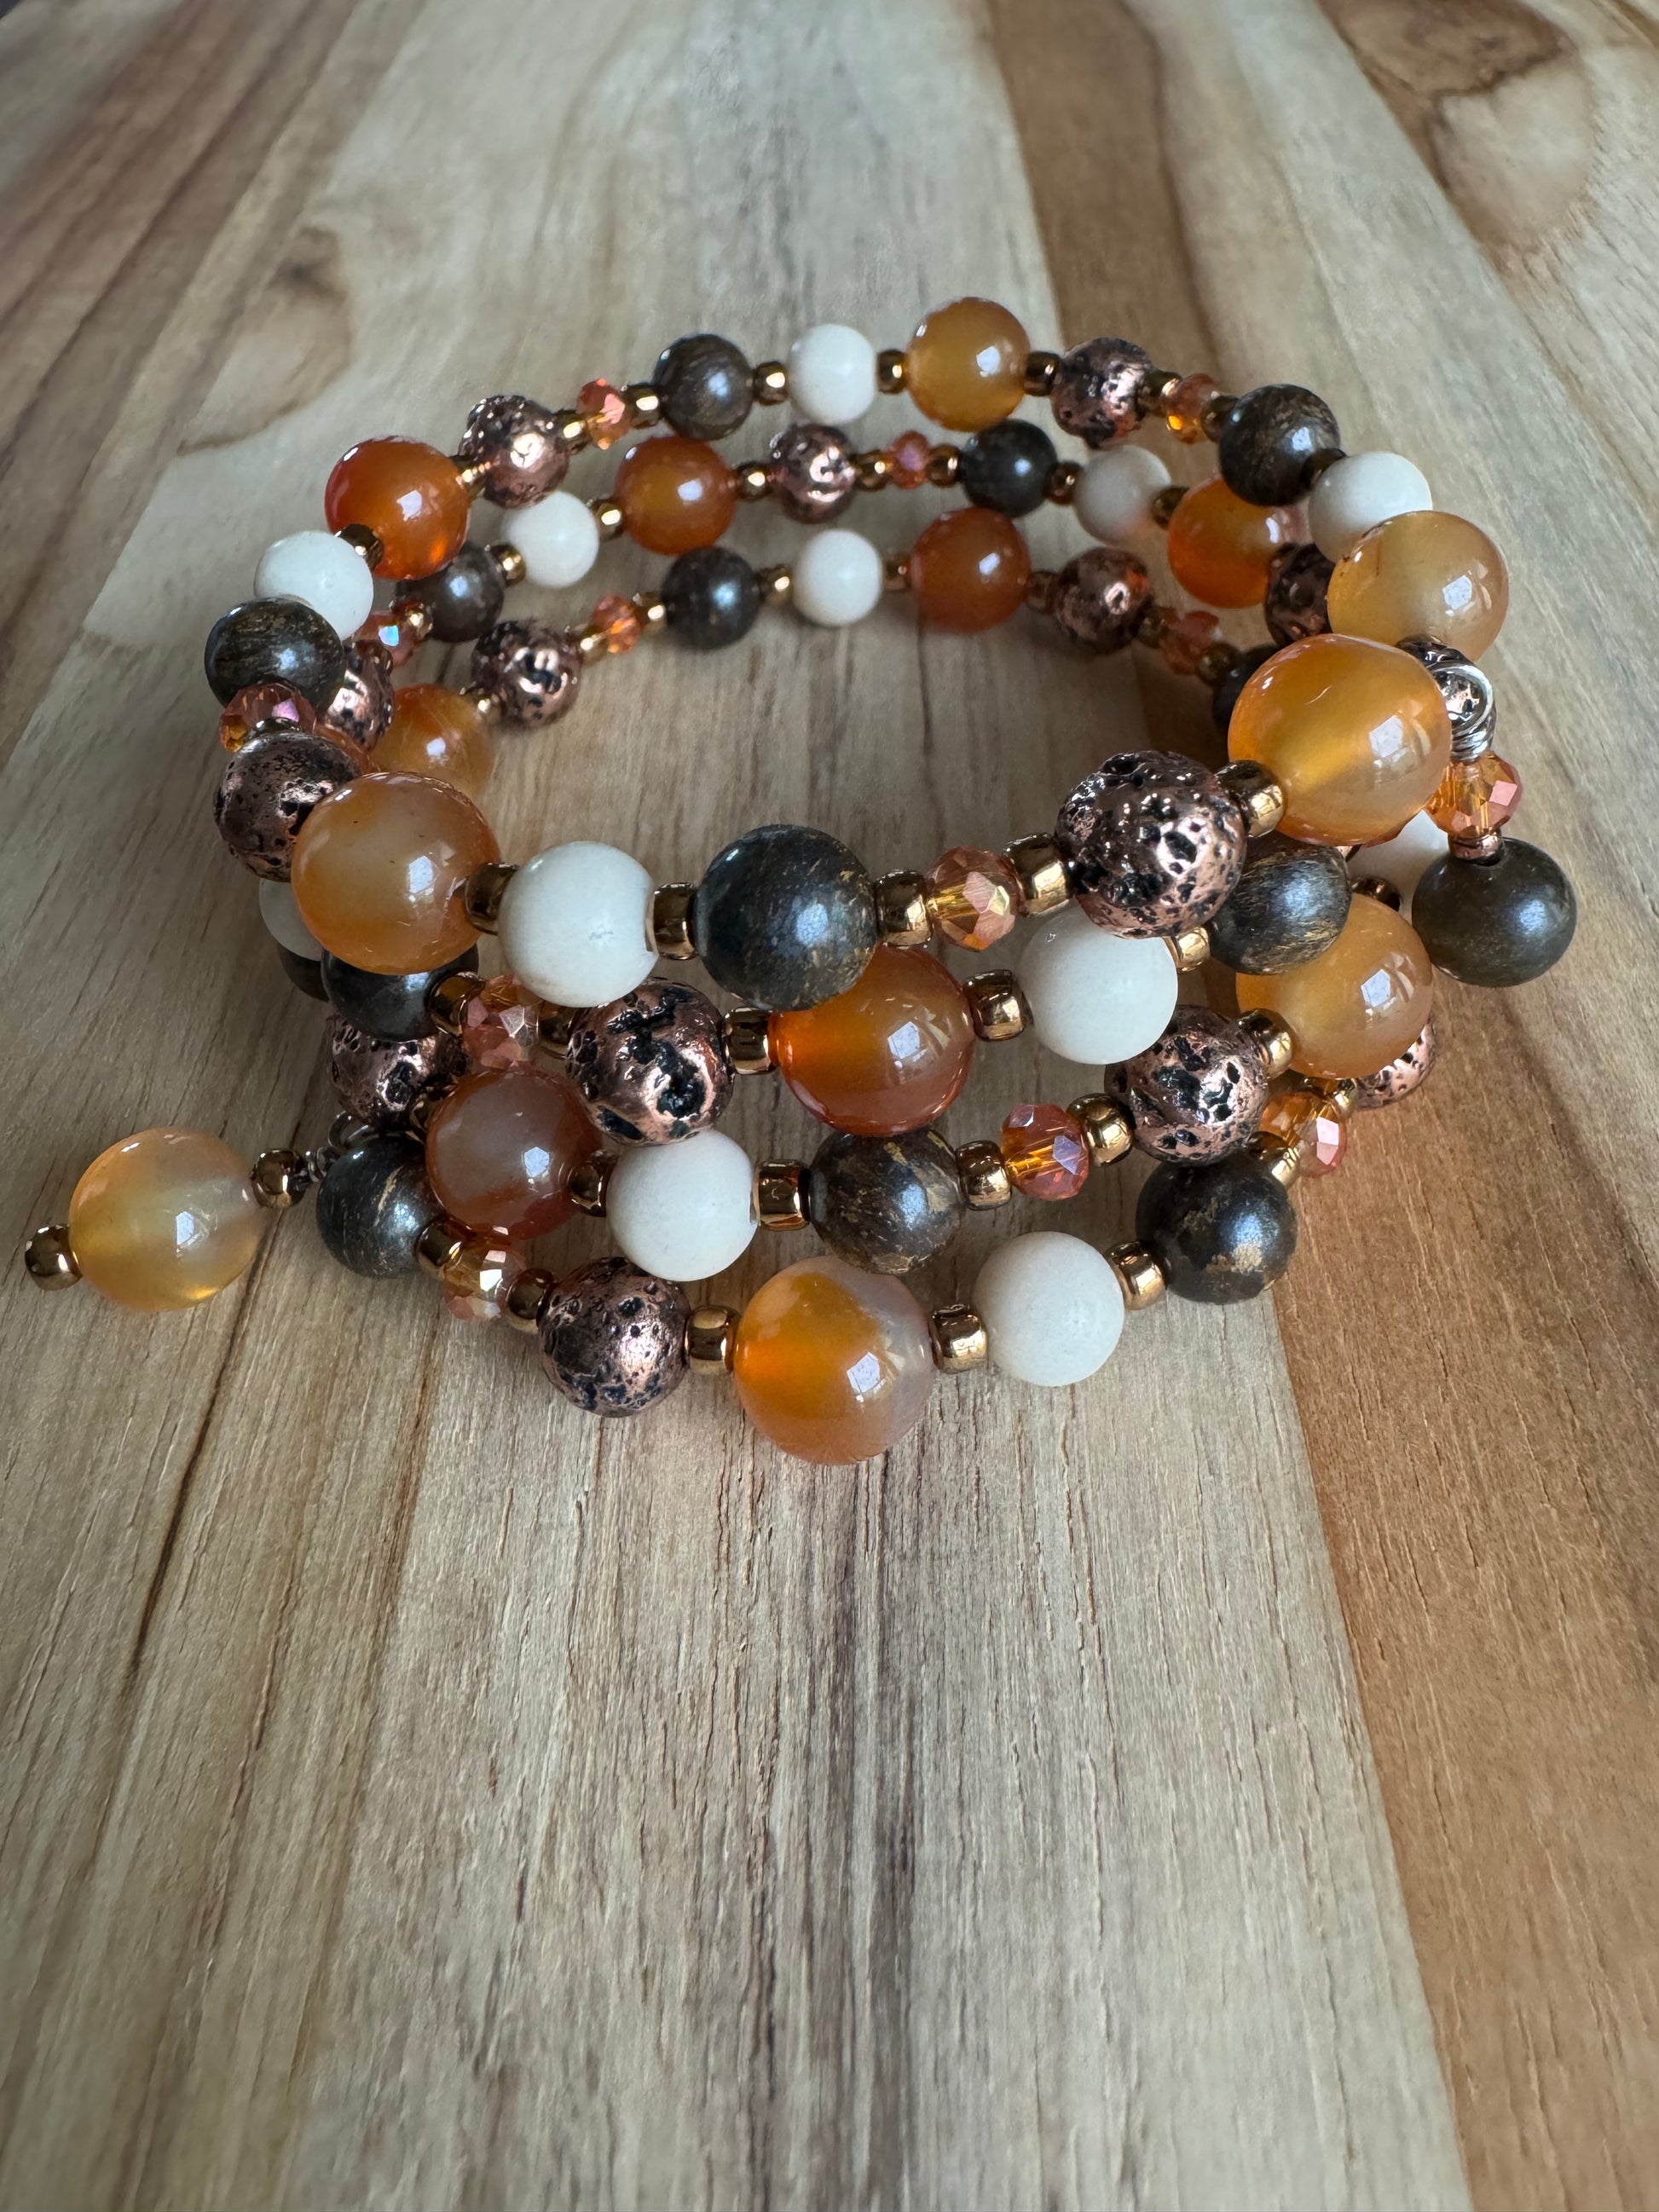 Memory Wire Beaded Bracelet with Agate Bronzite Riverstone Lava Stine and Crystal Beads - My Urban Gems